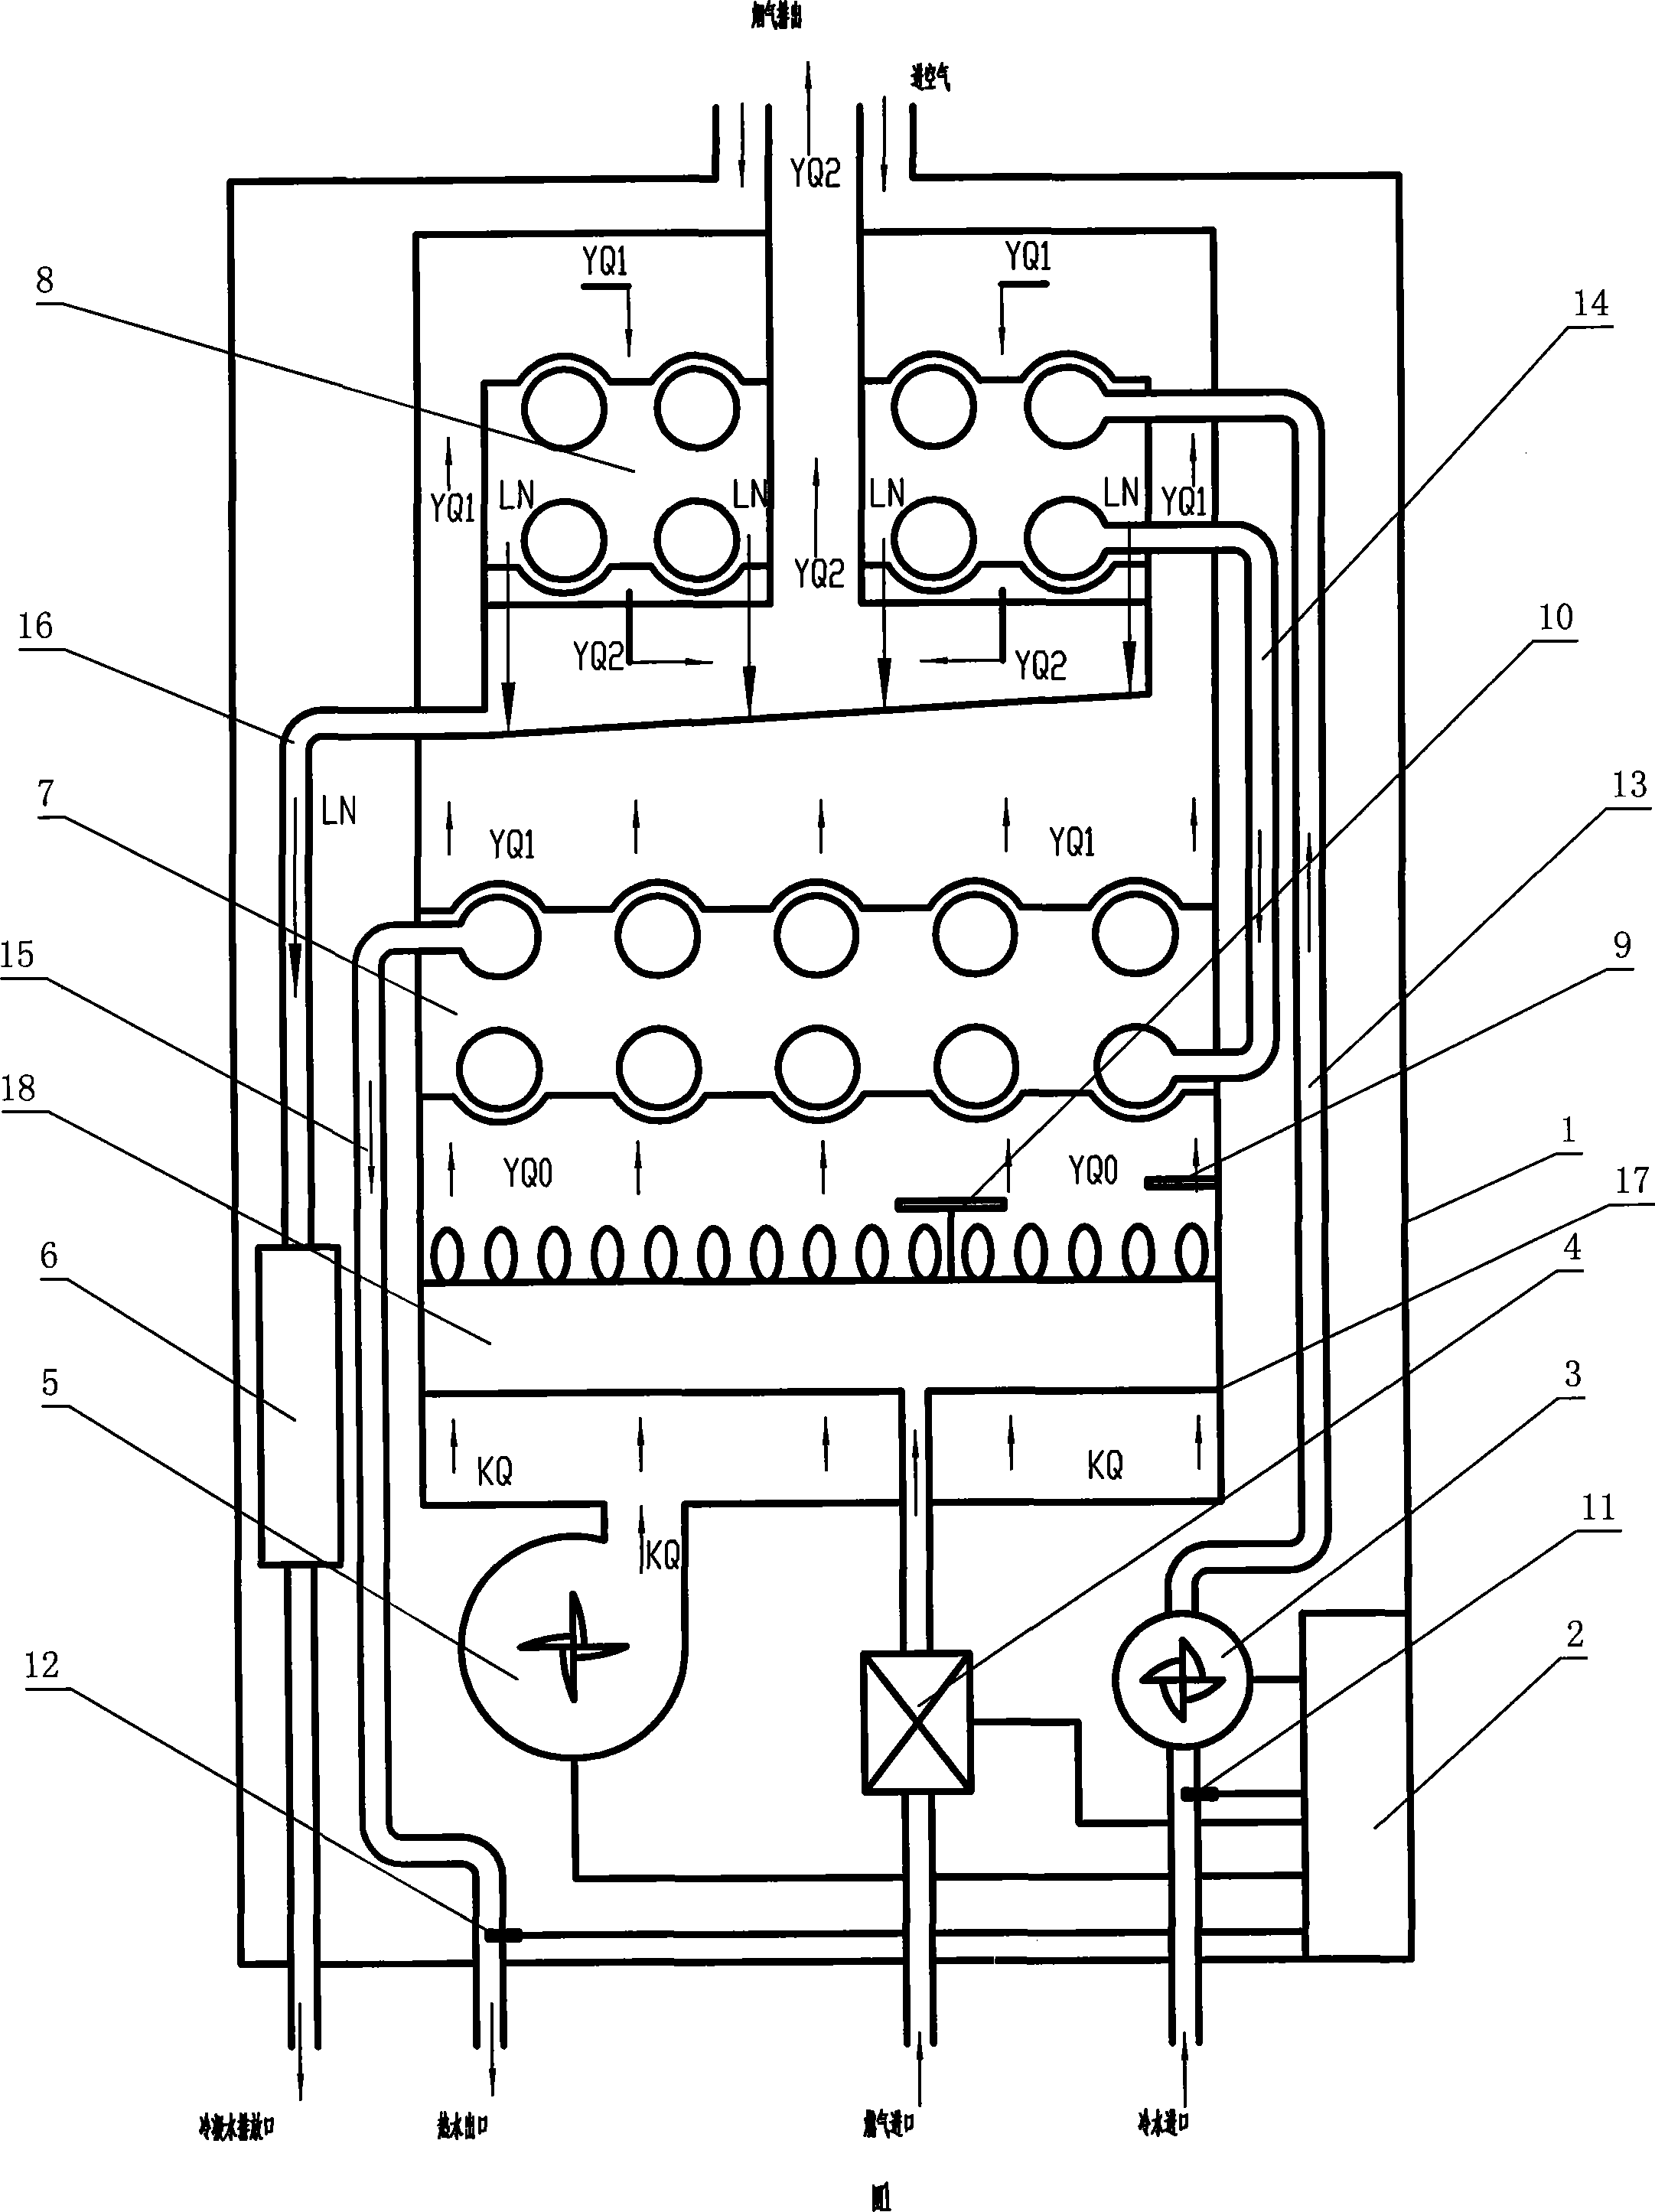 Condensing gas water heater and flue gas flowing mode